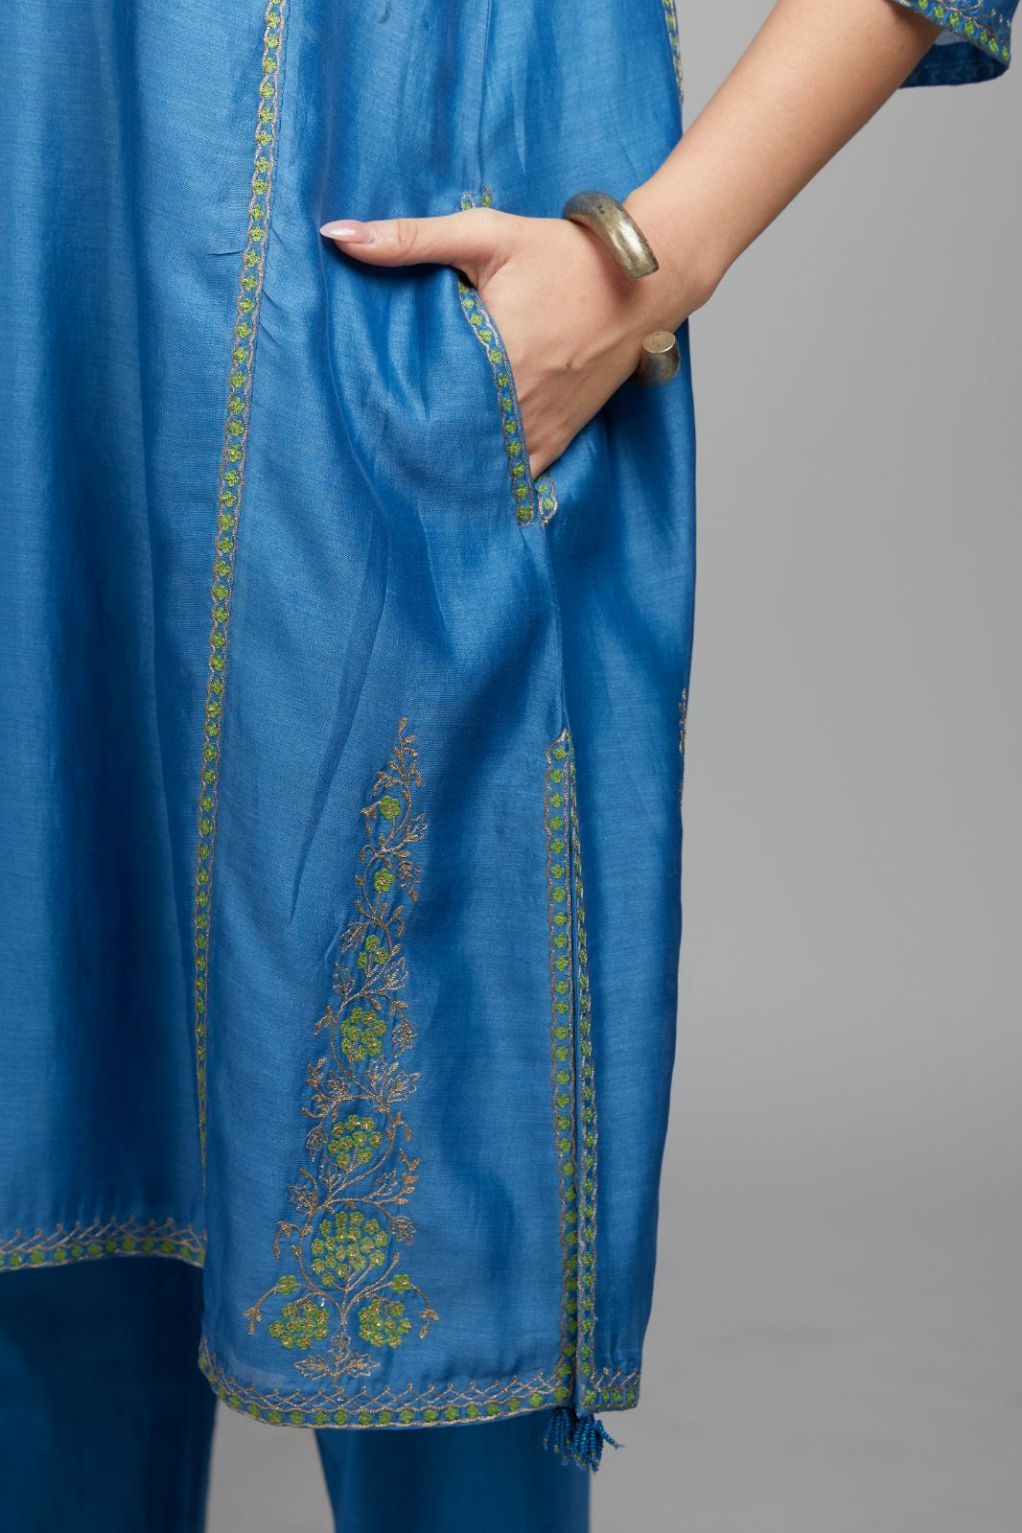 Blue short kalidar kurta set, highlighted with delicate contrast coloured embroidery